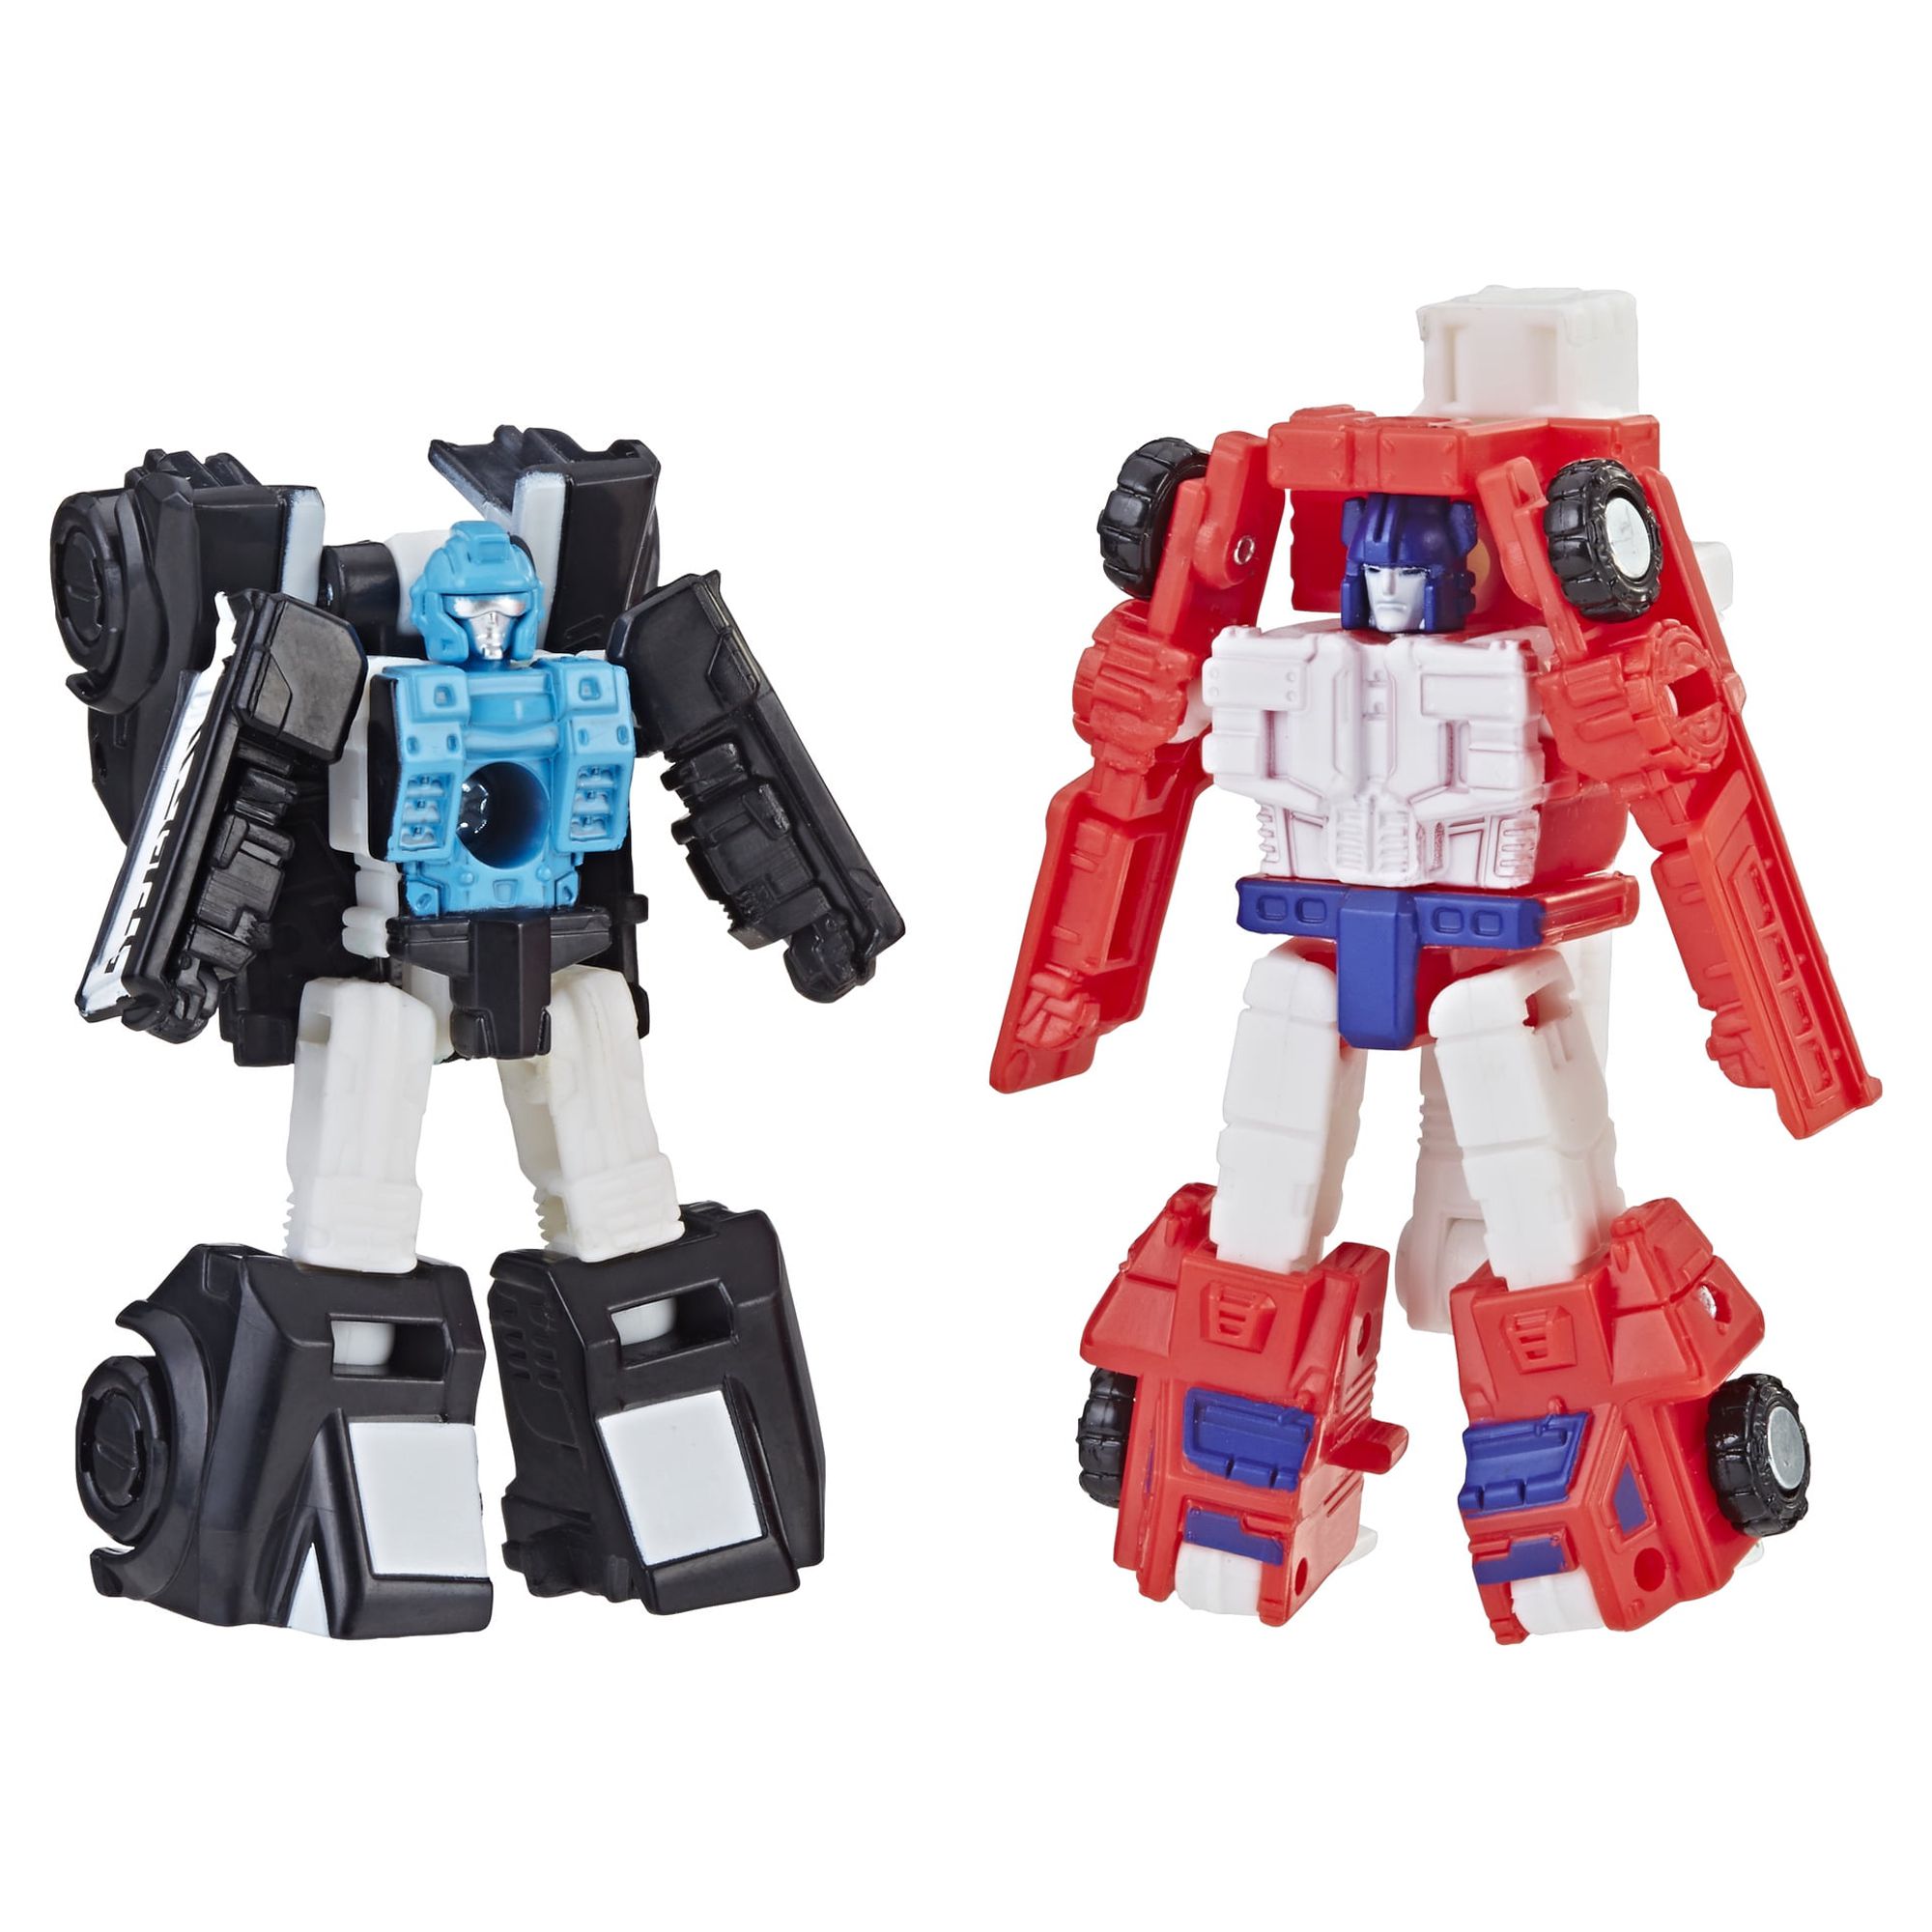 Transformers Generations: Siege Micromaster and Autobot Rescue Patrol Figures - image 1 of 3